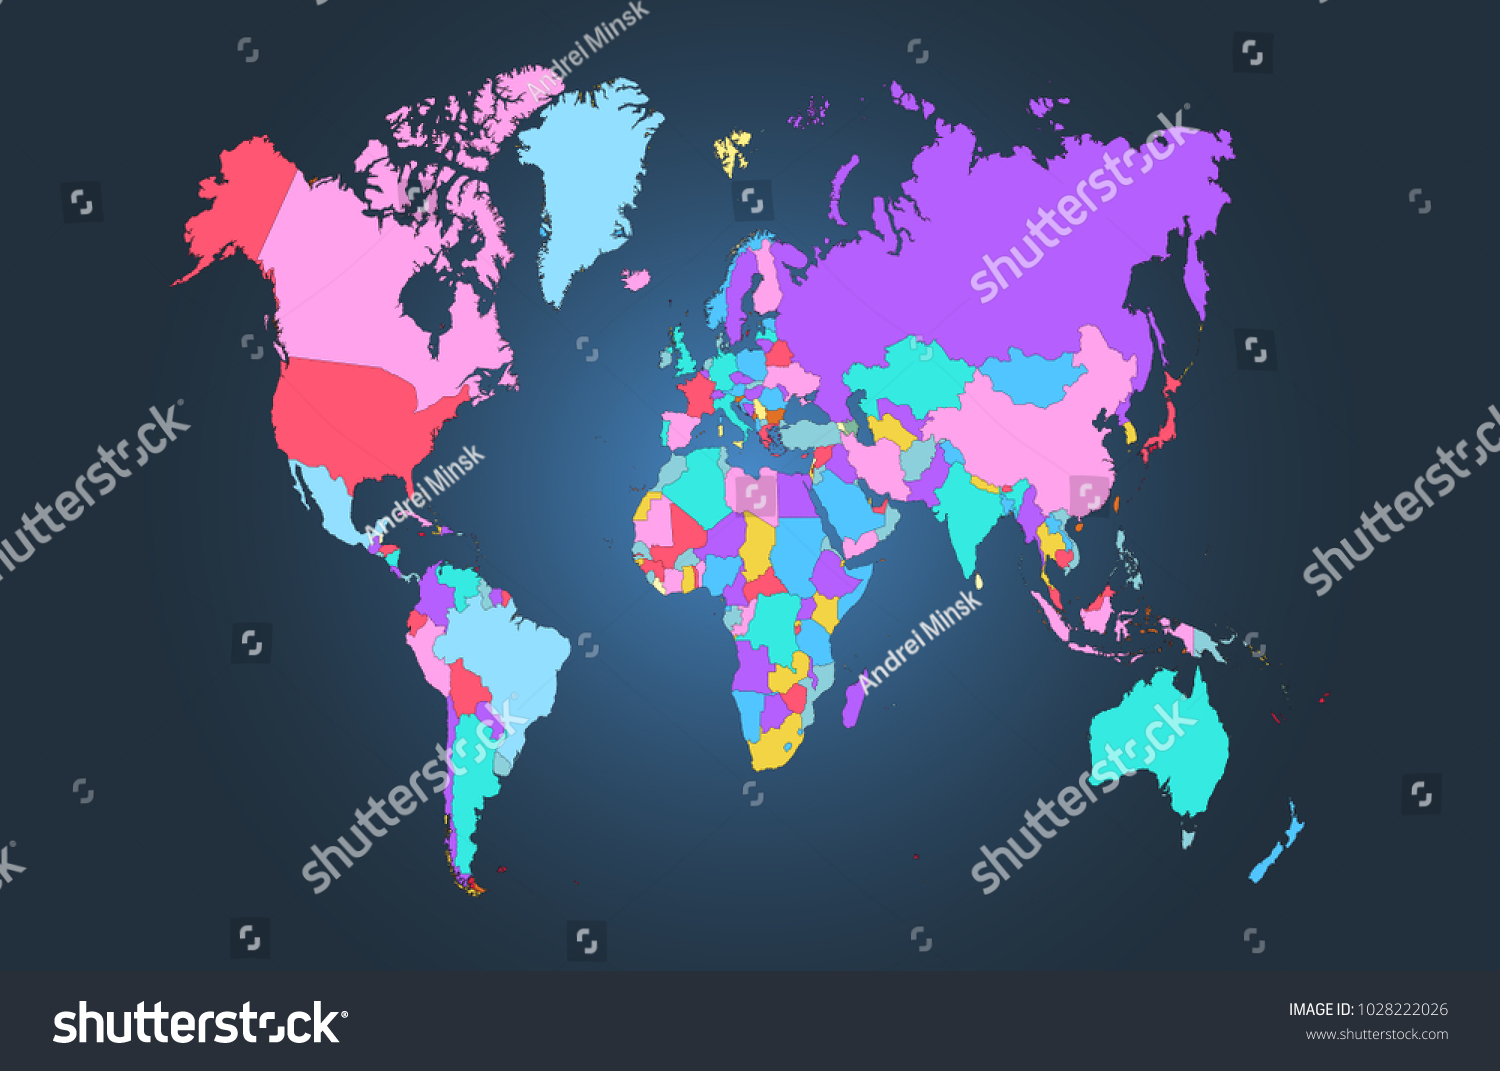 Color World Map Vector Stock Vector Royalty Free 1028222026 Shutterstock 0614